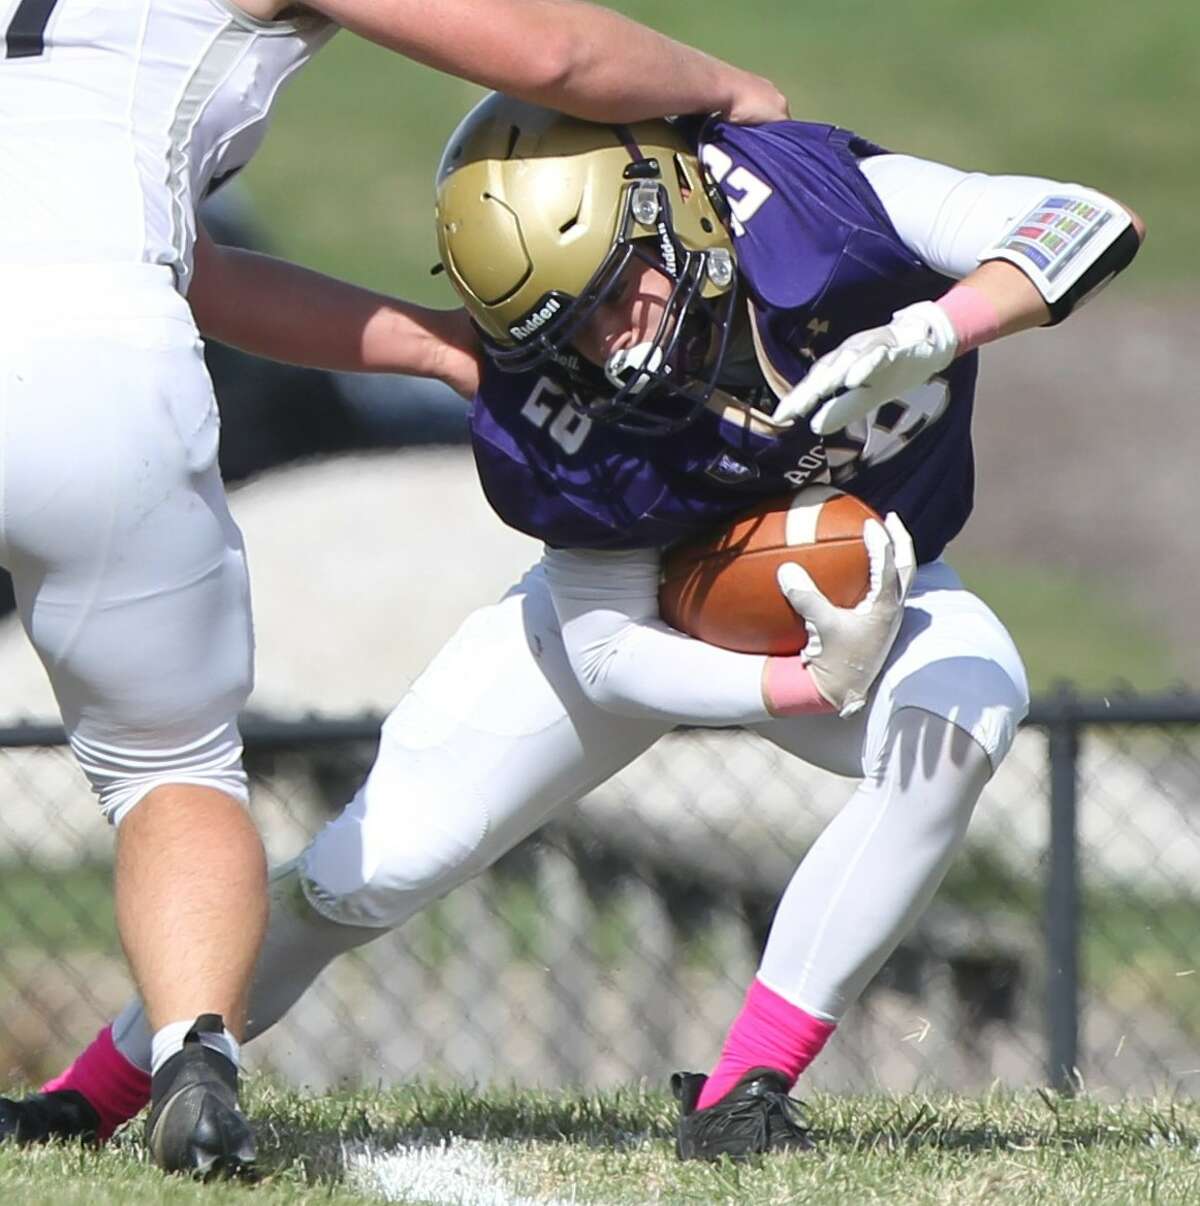 Routt's Dax Baptist pulls away from a tackler during a football game against West Central at the old MacMurray College field in Jacksonville last Saturday.